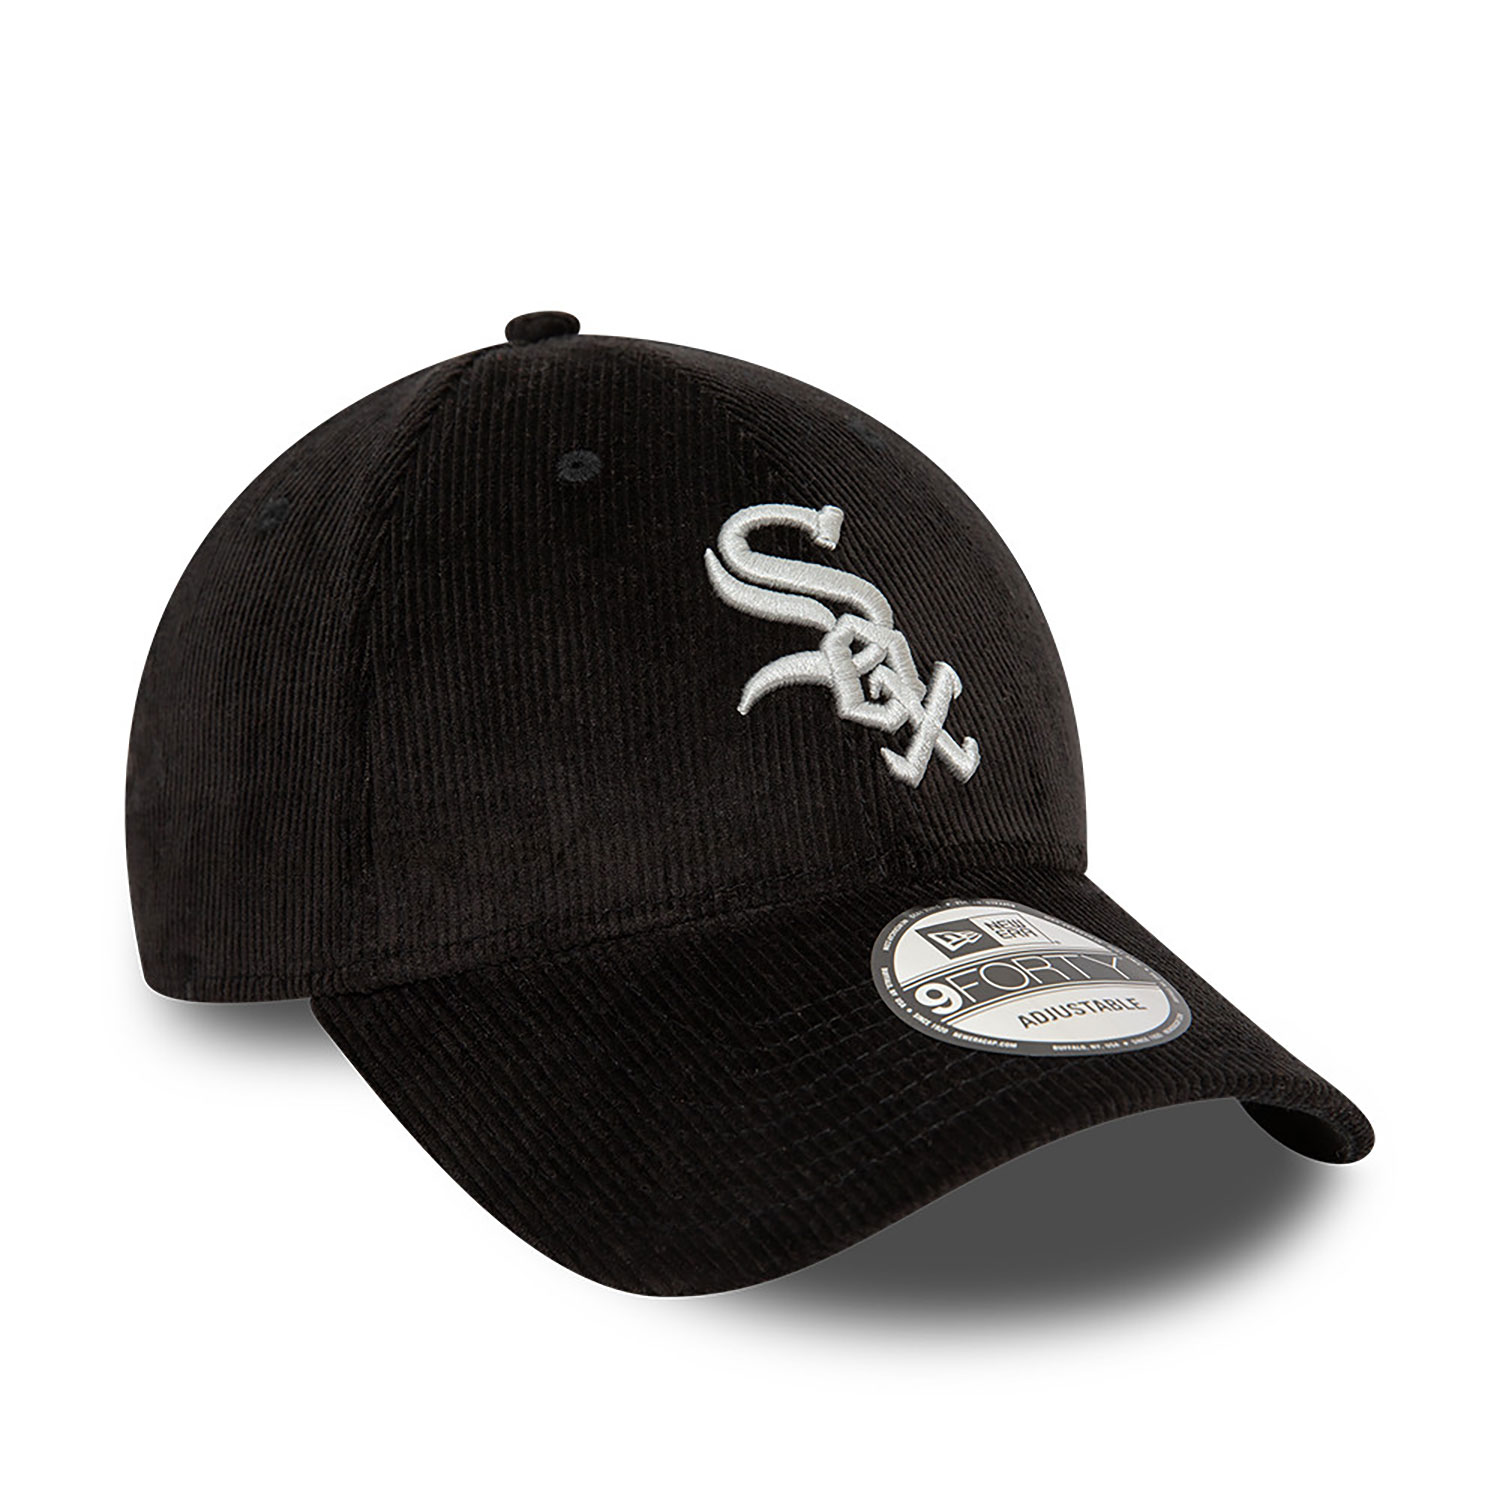 Chicago White Sox Cord Black 9FORTY Adjustable Cap